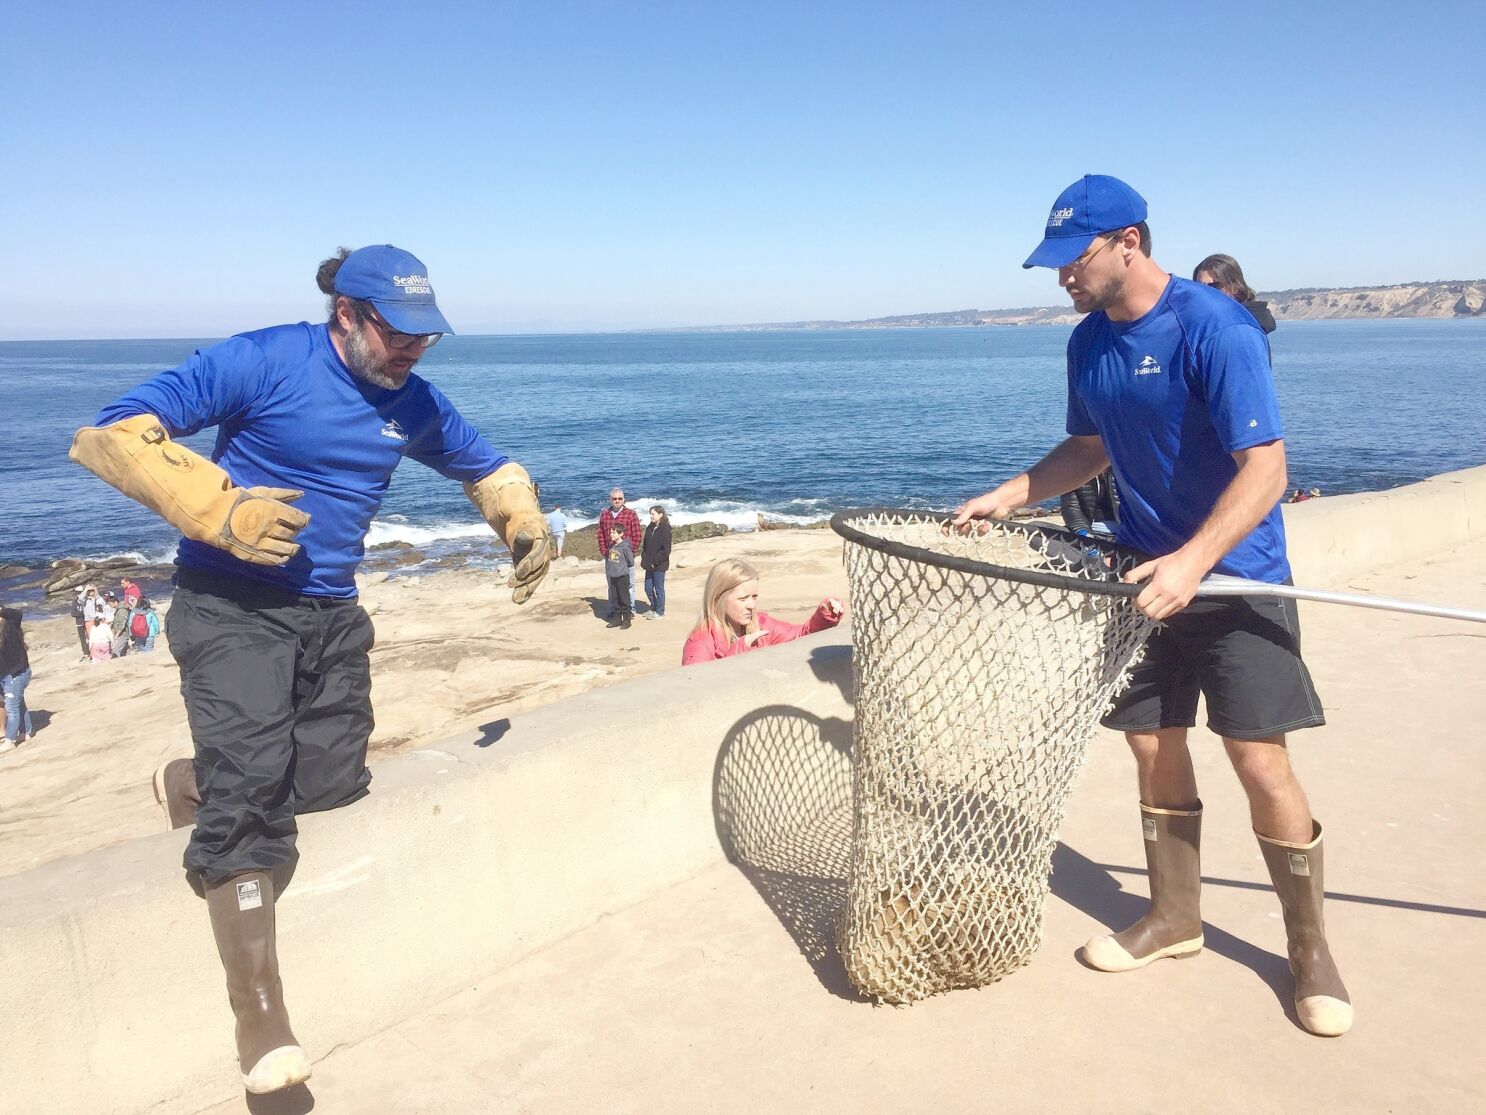 La Jolla News Nuggets: SeaWorld rescues five sea-lion pups; 'Sudden  braking' in Lime scooters and more noteworthy local news - La Jolla Light